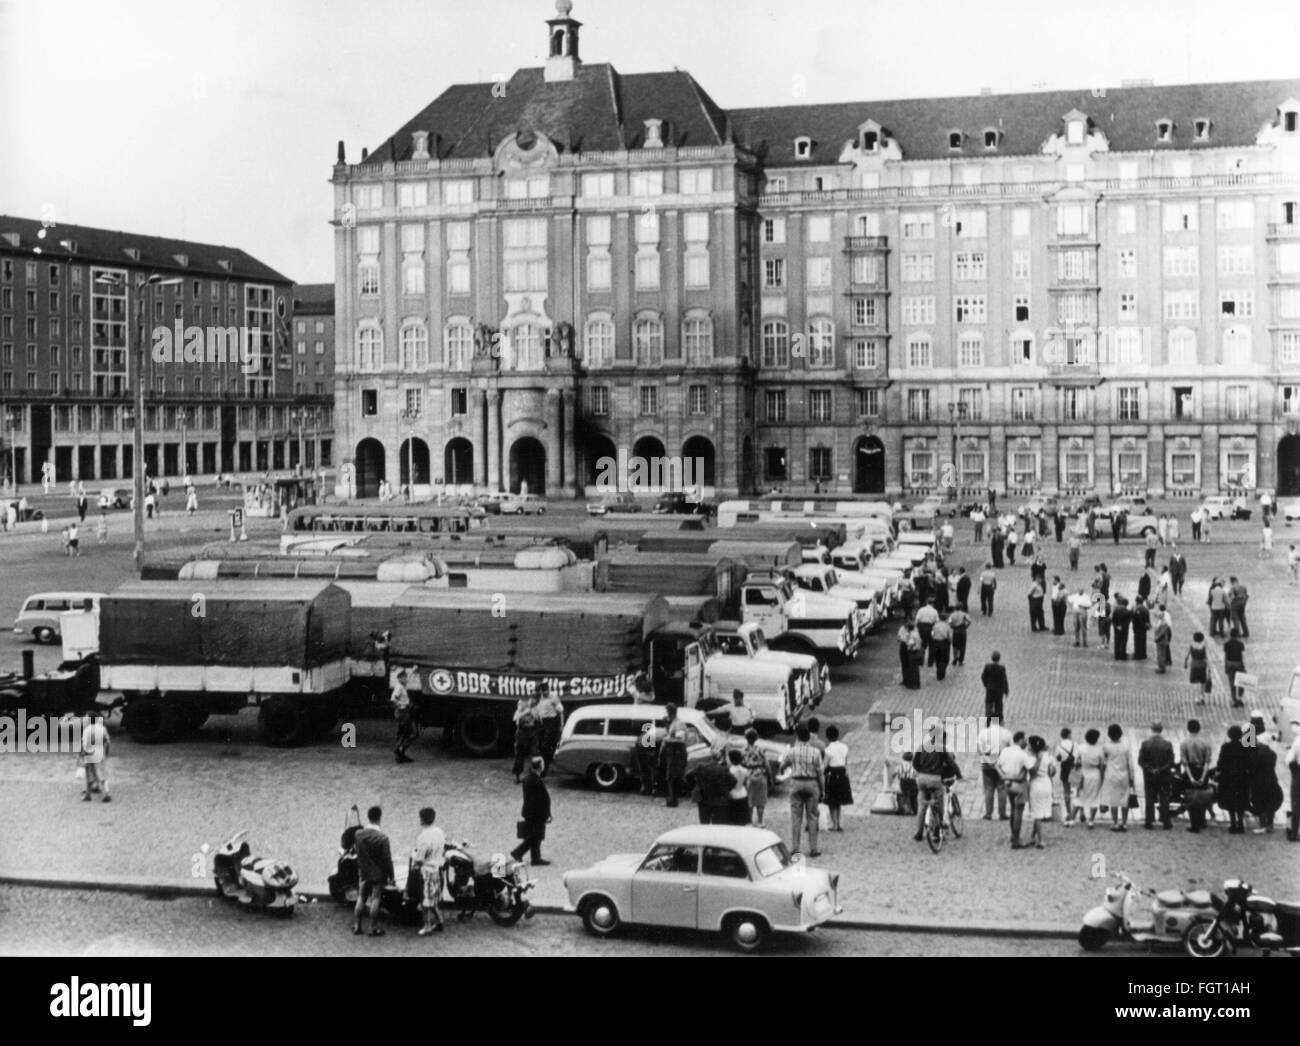 disasters,earthquakes,Skopje,Yugoslavia,26.7.1963,relief supply of the Red Cross,lorries with relief supplies on the main square of Dresden,Germany,August 1963,Macedonia,relief supplies,International Red Cross,German Red Cross,American Red Cross,British Red Cross Society,relief,aid,meeting place,assembly point,convoys,under convoy,in convoy,supply,resupply,East-Germany,GDR,DDR,East Germany,Eastern Germany,Saxony,1960s,60s,20th century,crowd,crowds,crowds of people,disaster,disasters,earthquake,temblor,seism,shake,lorrie,Additional-Rights-Clearences-Not Available Stock Photo